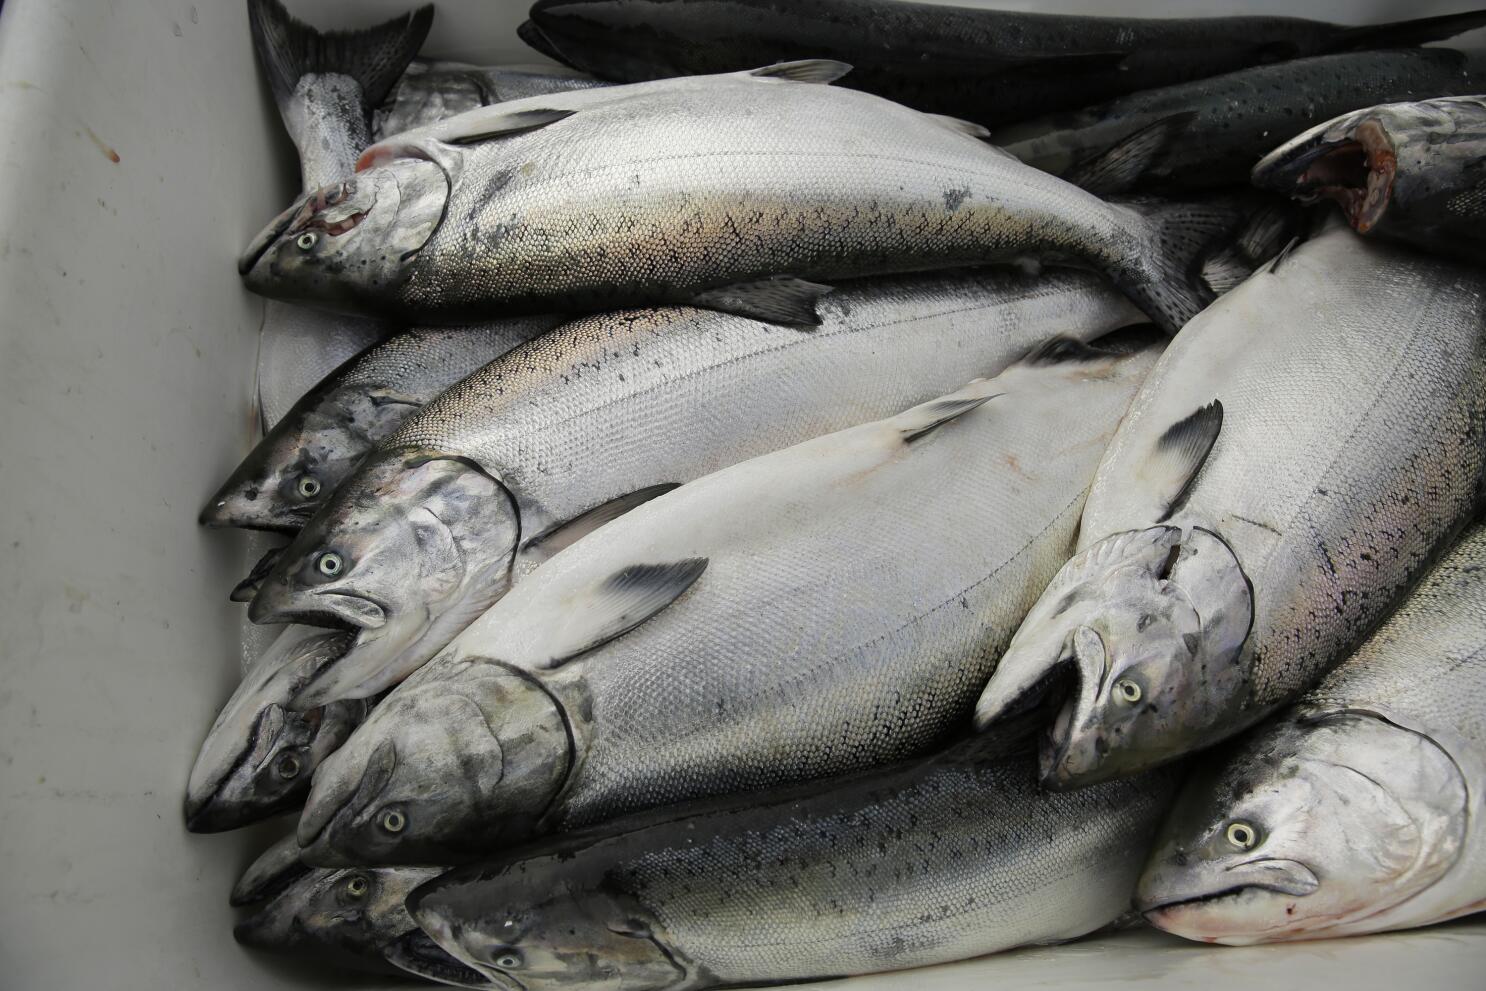 Off the hook: California king salmon rebounds after drought - Los